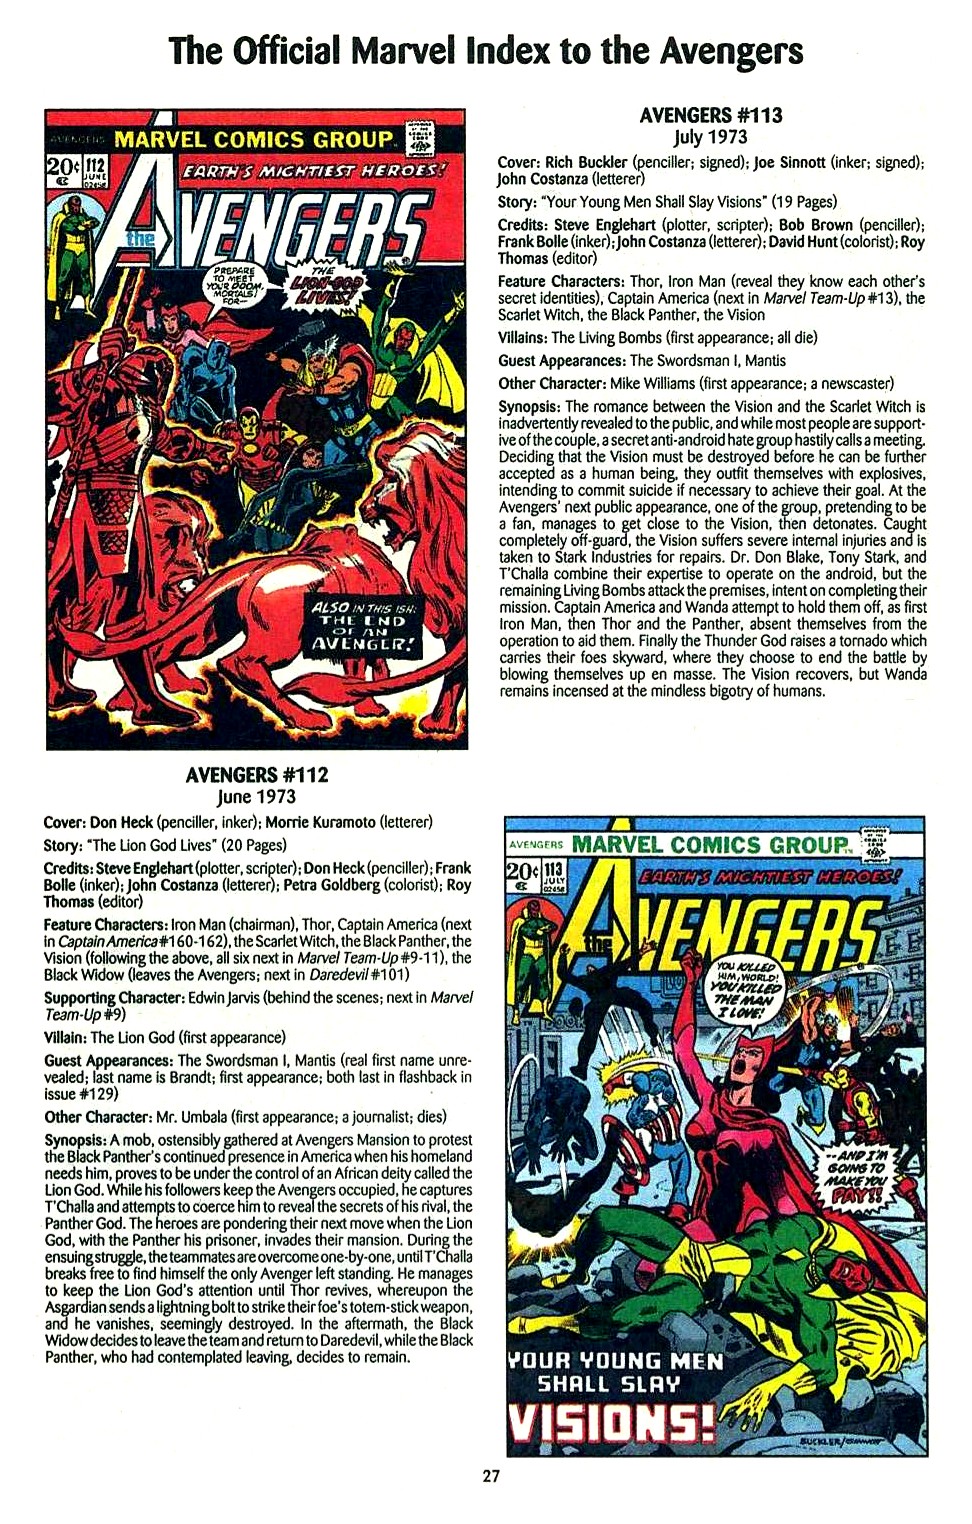 Read online The Official Marvel Index to the Avengers comic -  Issue #2 - 29